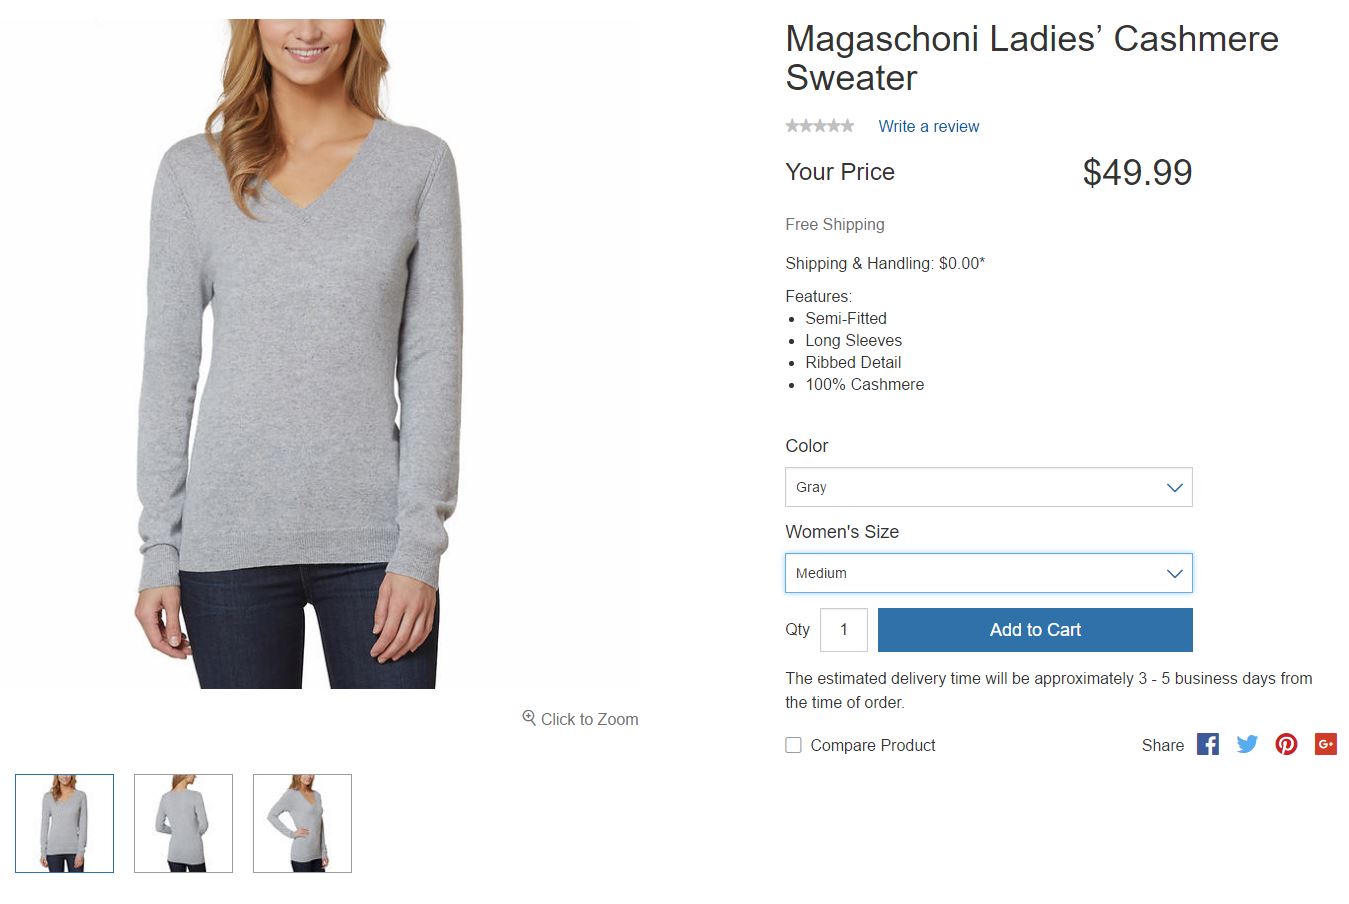 Magaschoni Ladies’ Cashmere Sweater